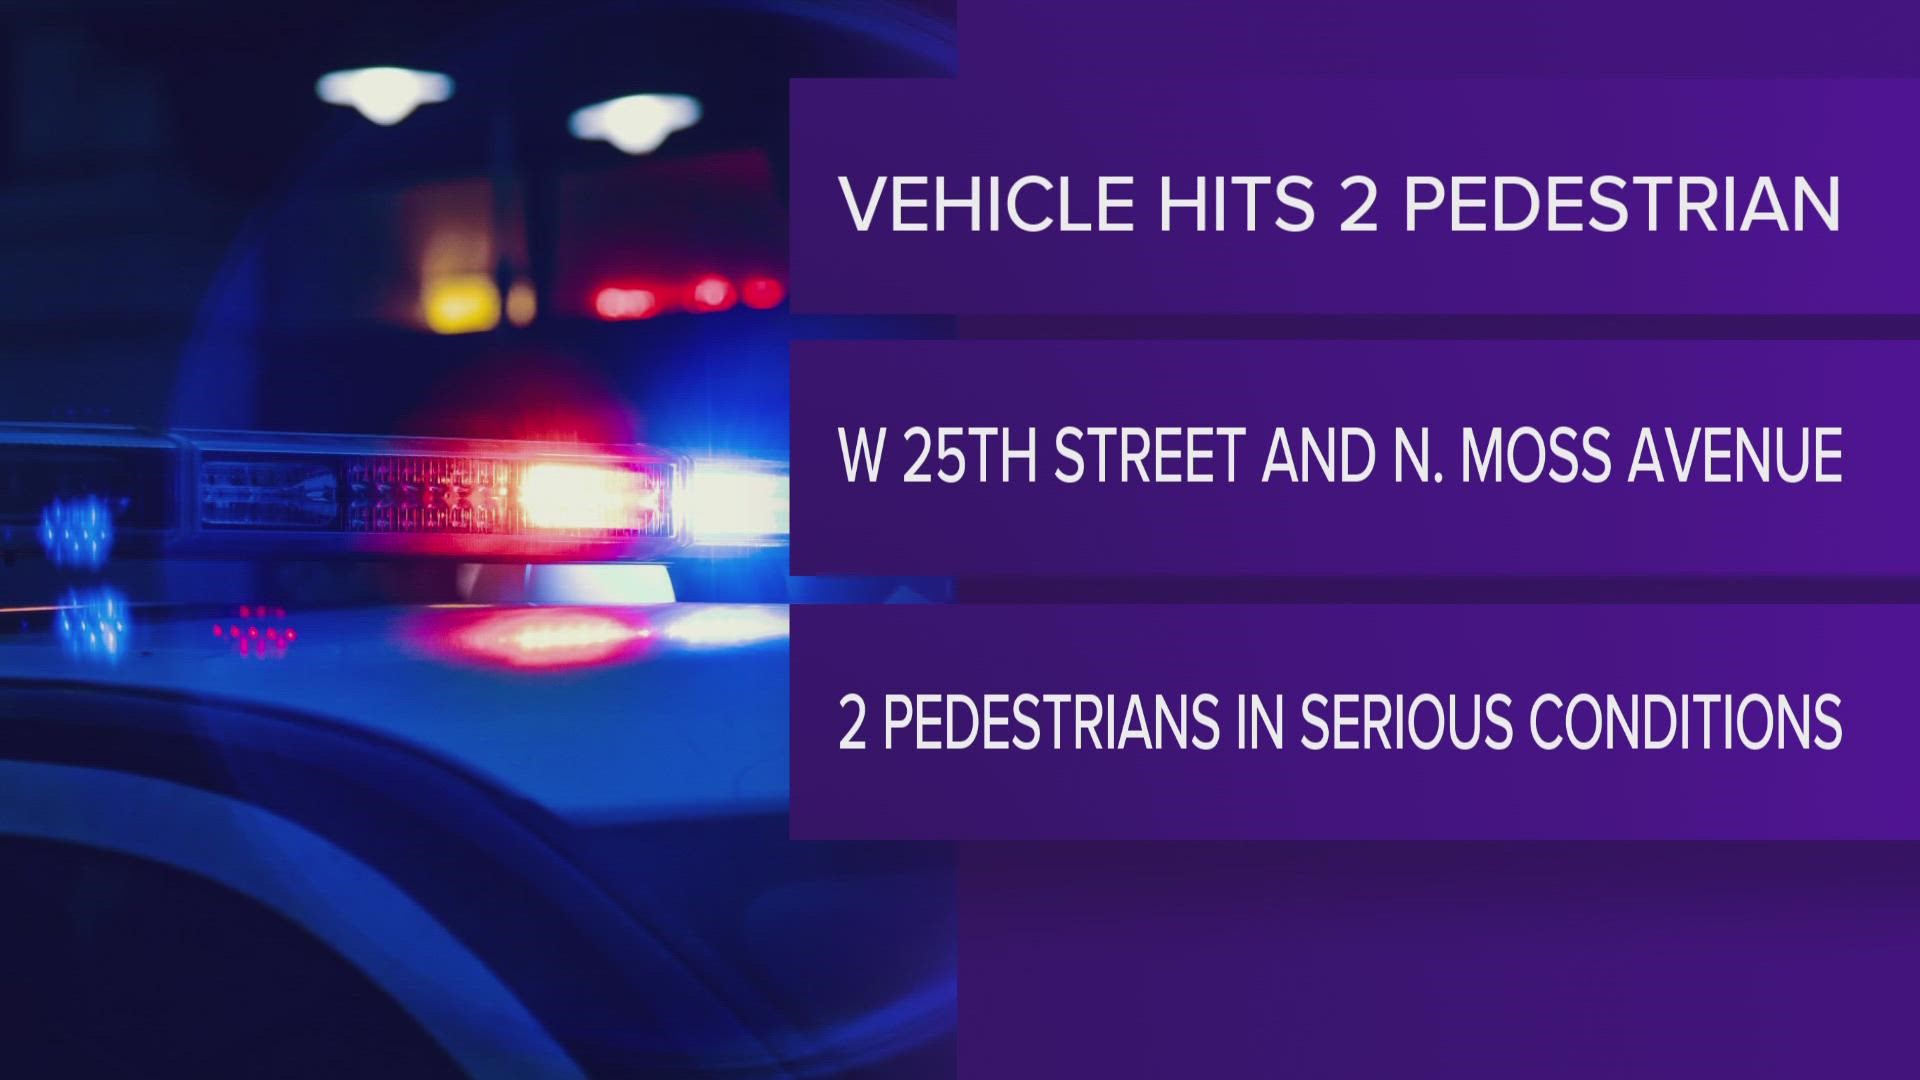 The wreck happened in the area of W 26th Street and N Moss Avenue.